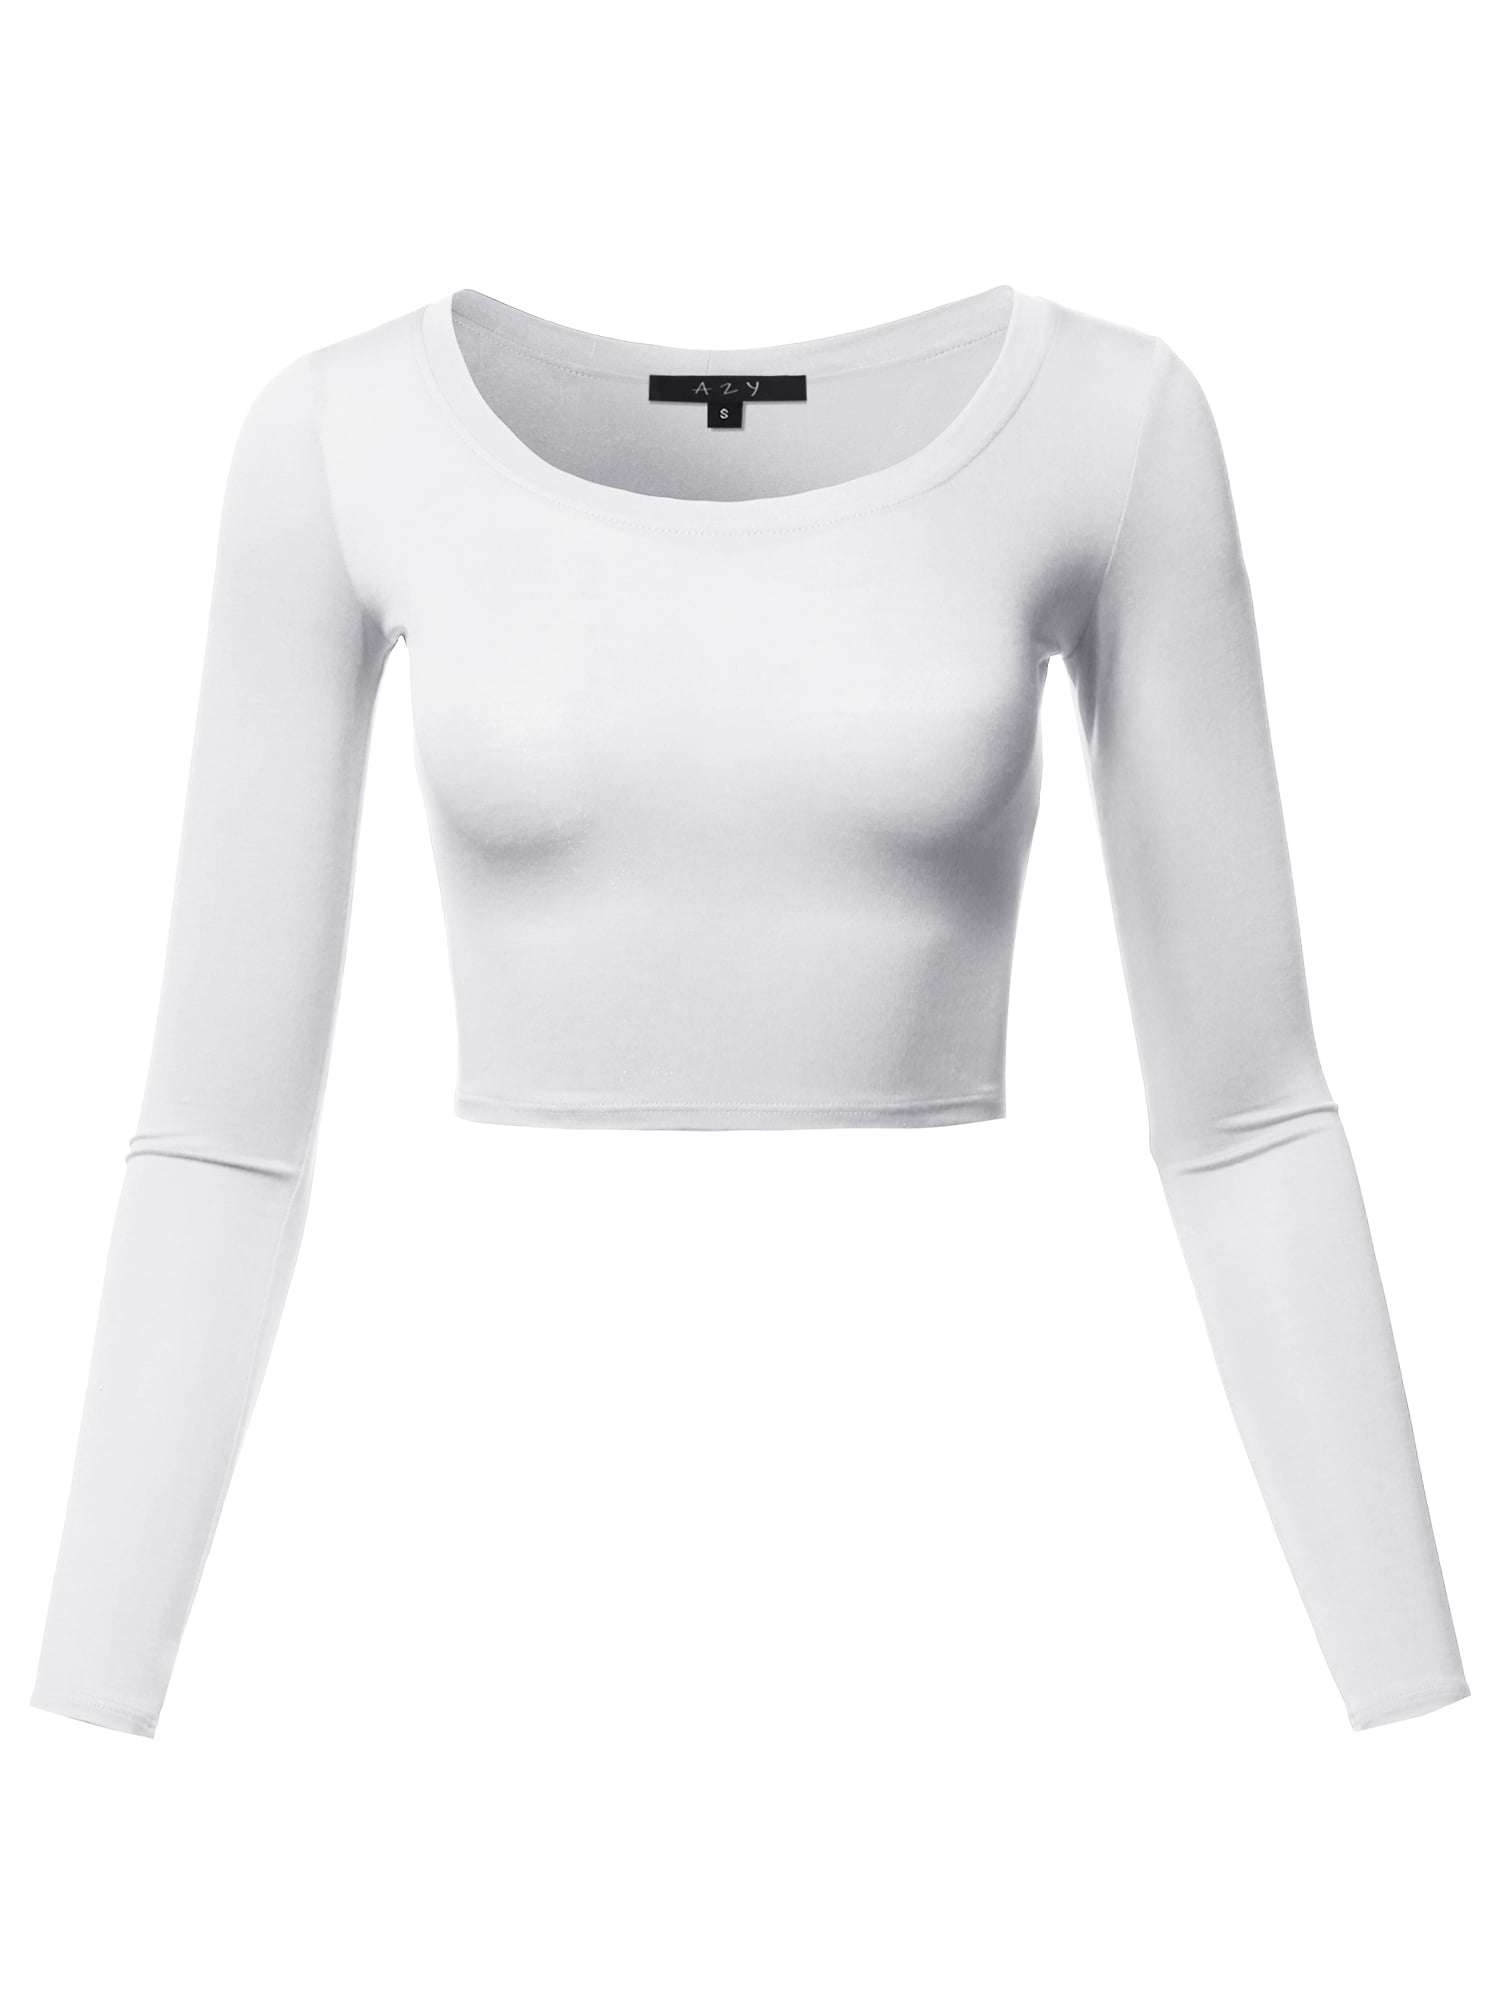 A2Y Women's Basic Solid Stretchable Scoop Neck Long Sleeve Crop Top White XS